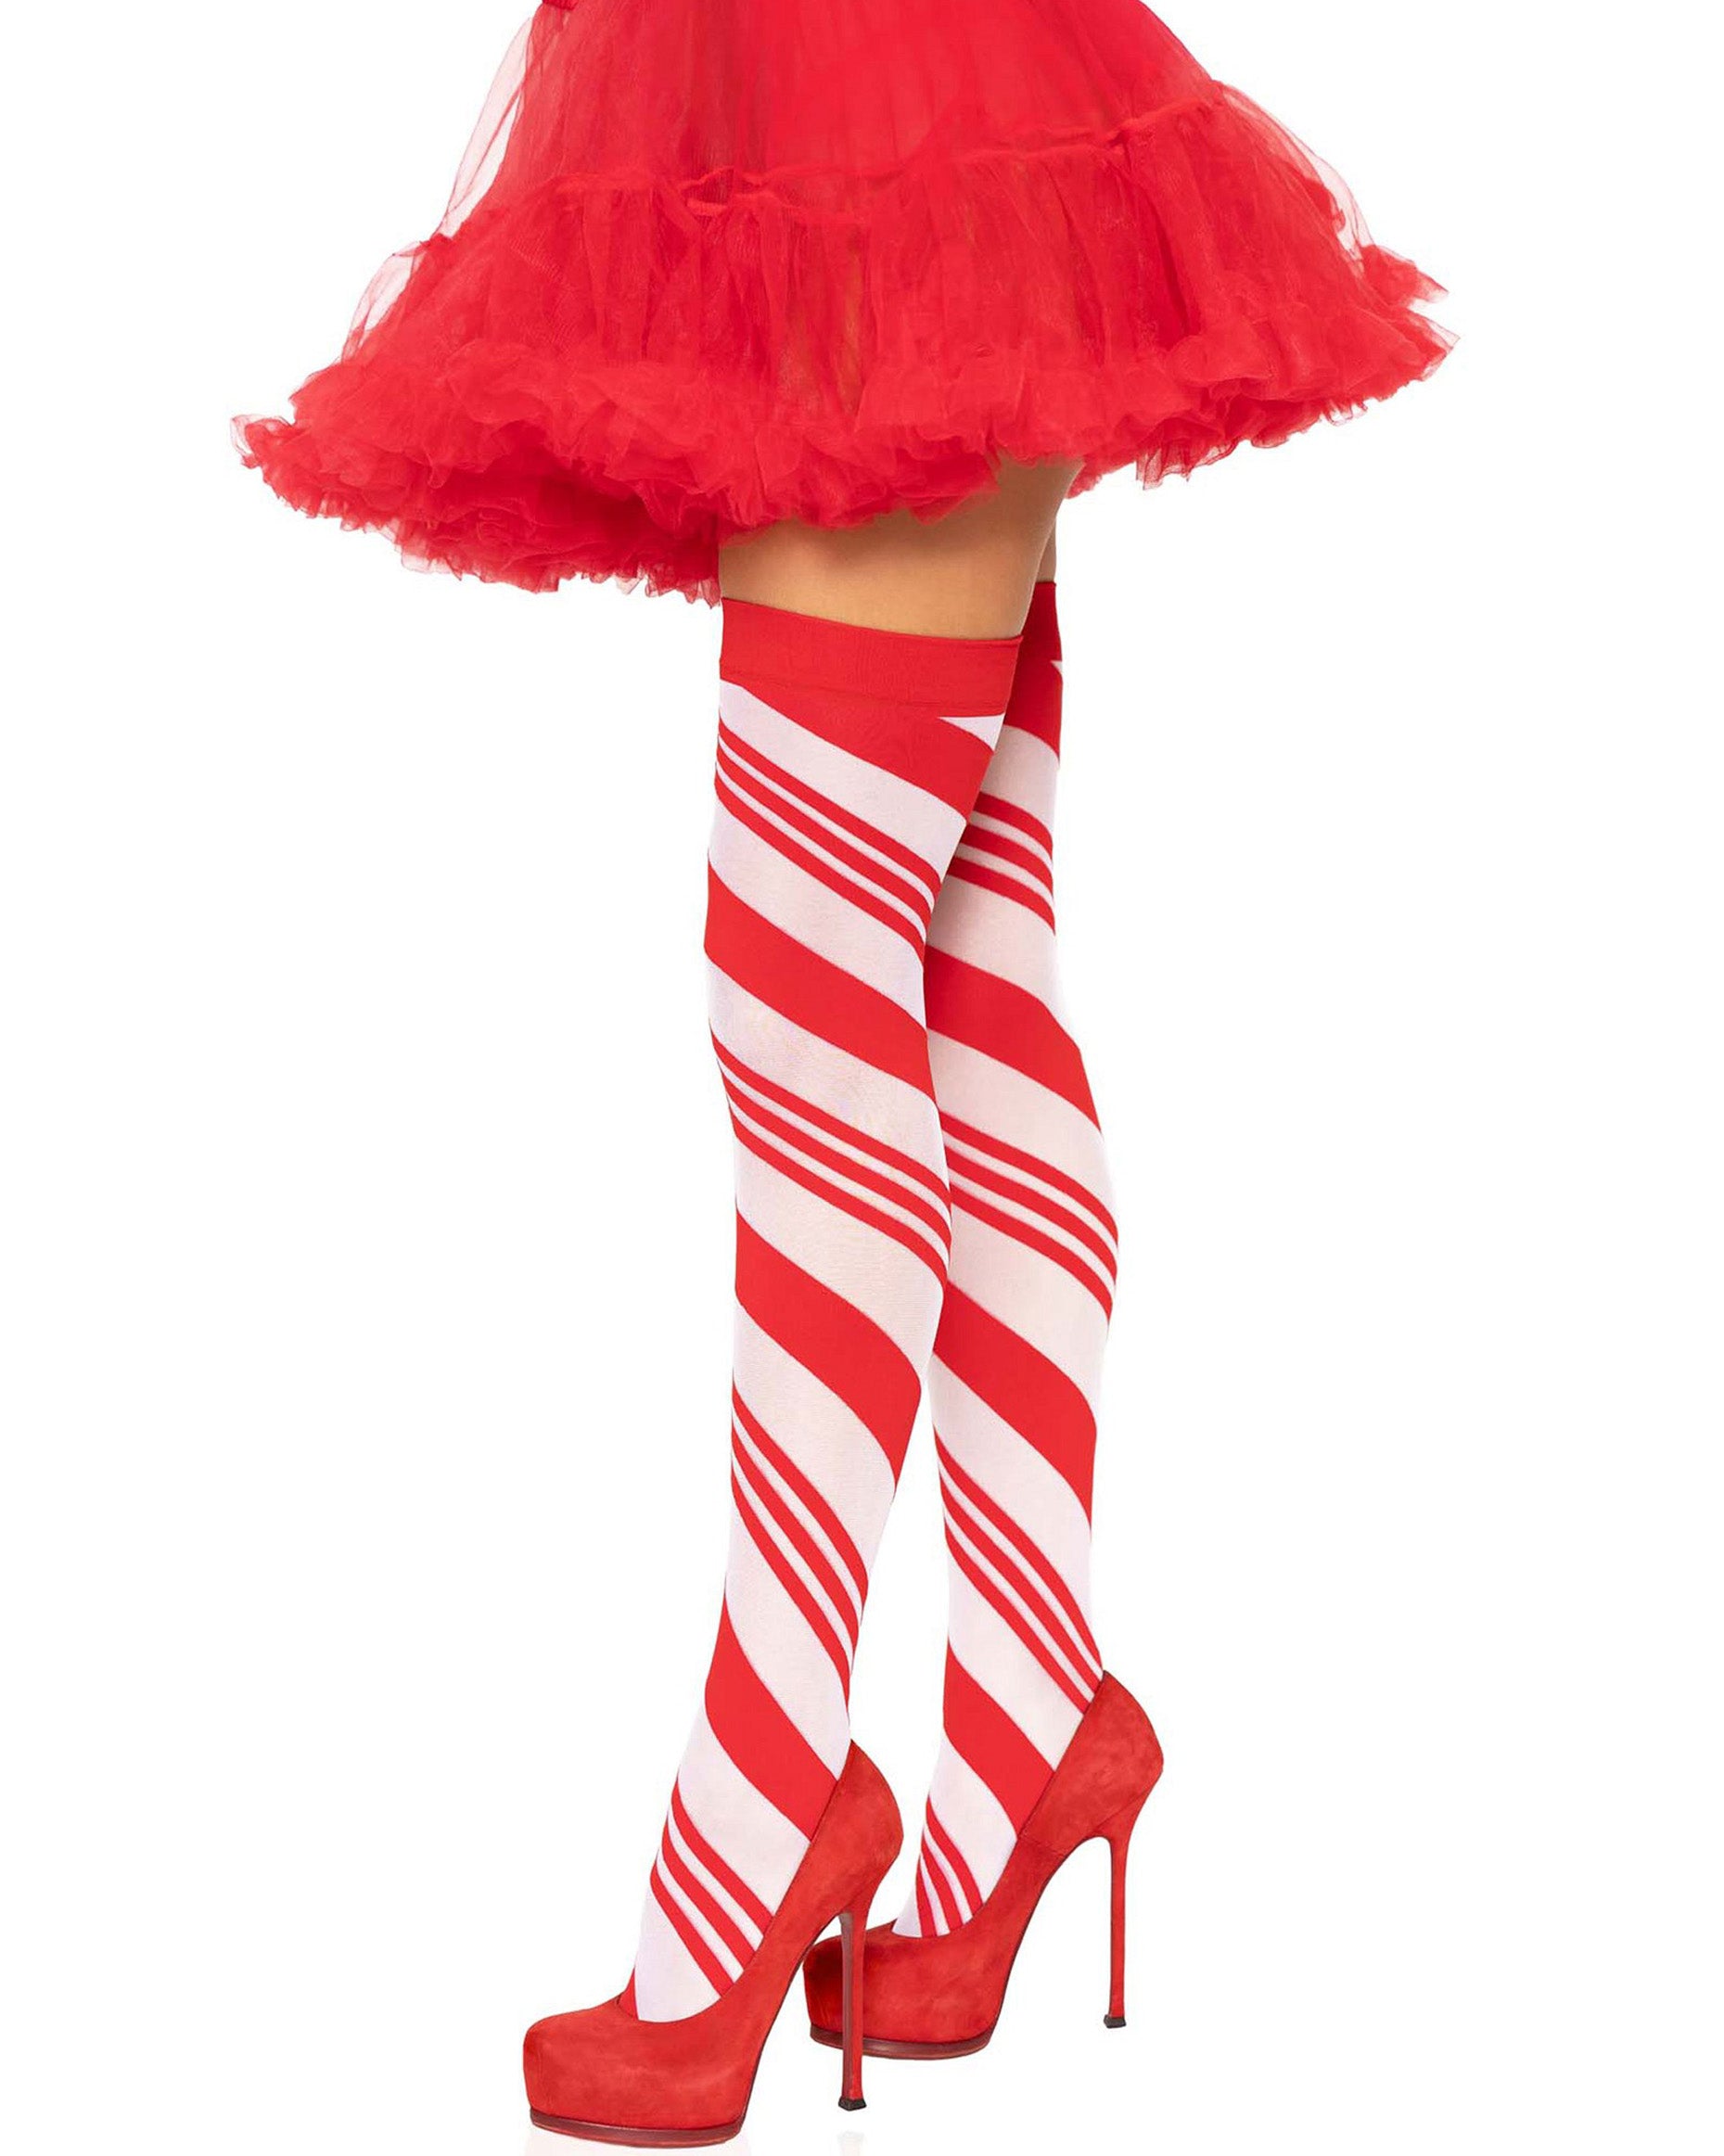 Leg Avenue 6628 Candy Cane Stockings - White opaque thigh high socks with a swirling candy cane style stripe wrapping diagonal around the leg with a plain red elasticated cuff. Worn with red high heel stilettos and red frilly tulle petticoat.